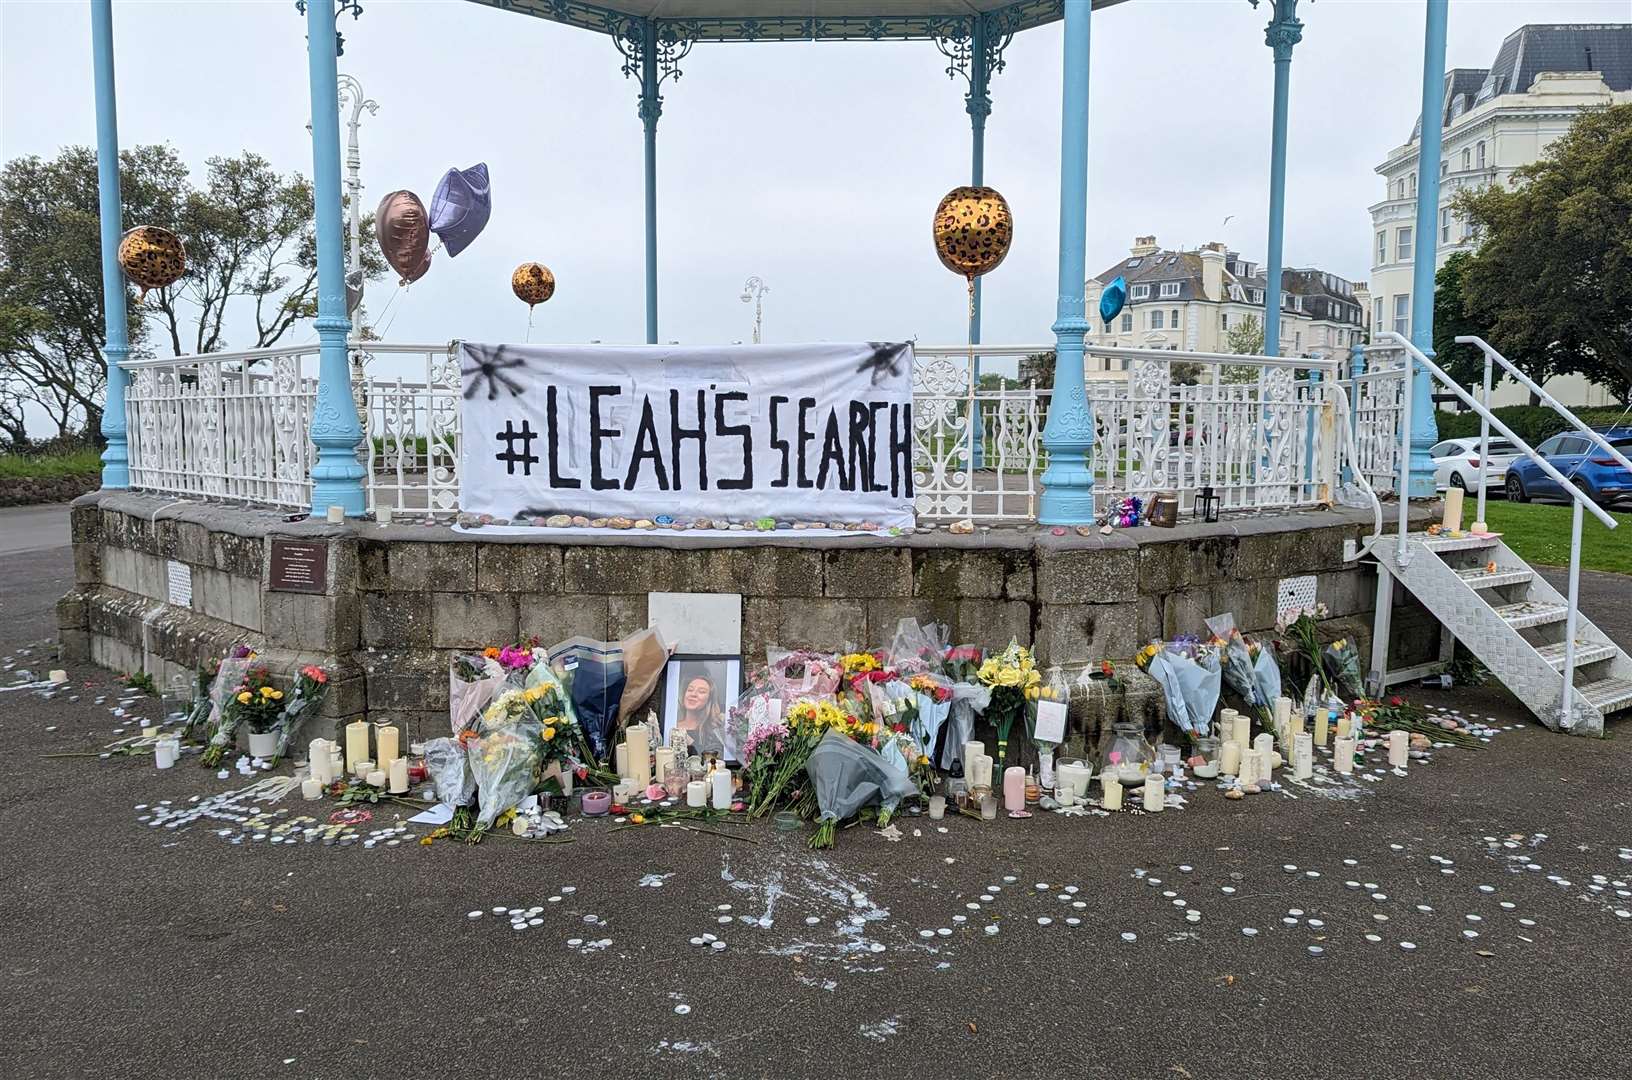 Tributes to Leah Daley left at the bandstand on The Leas in Folkestone following the discovery of a body in the search for the missing 24-year-old